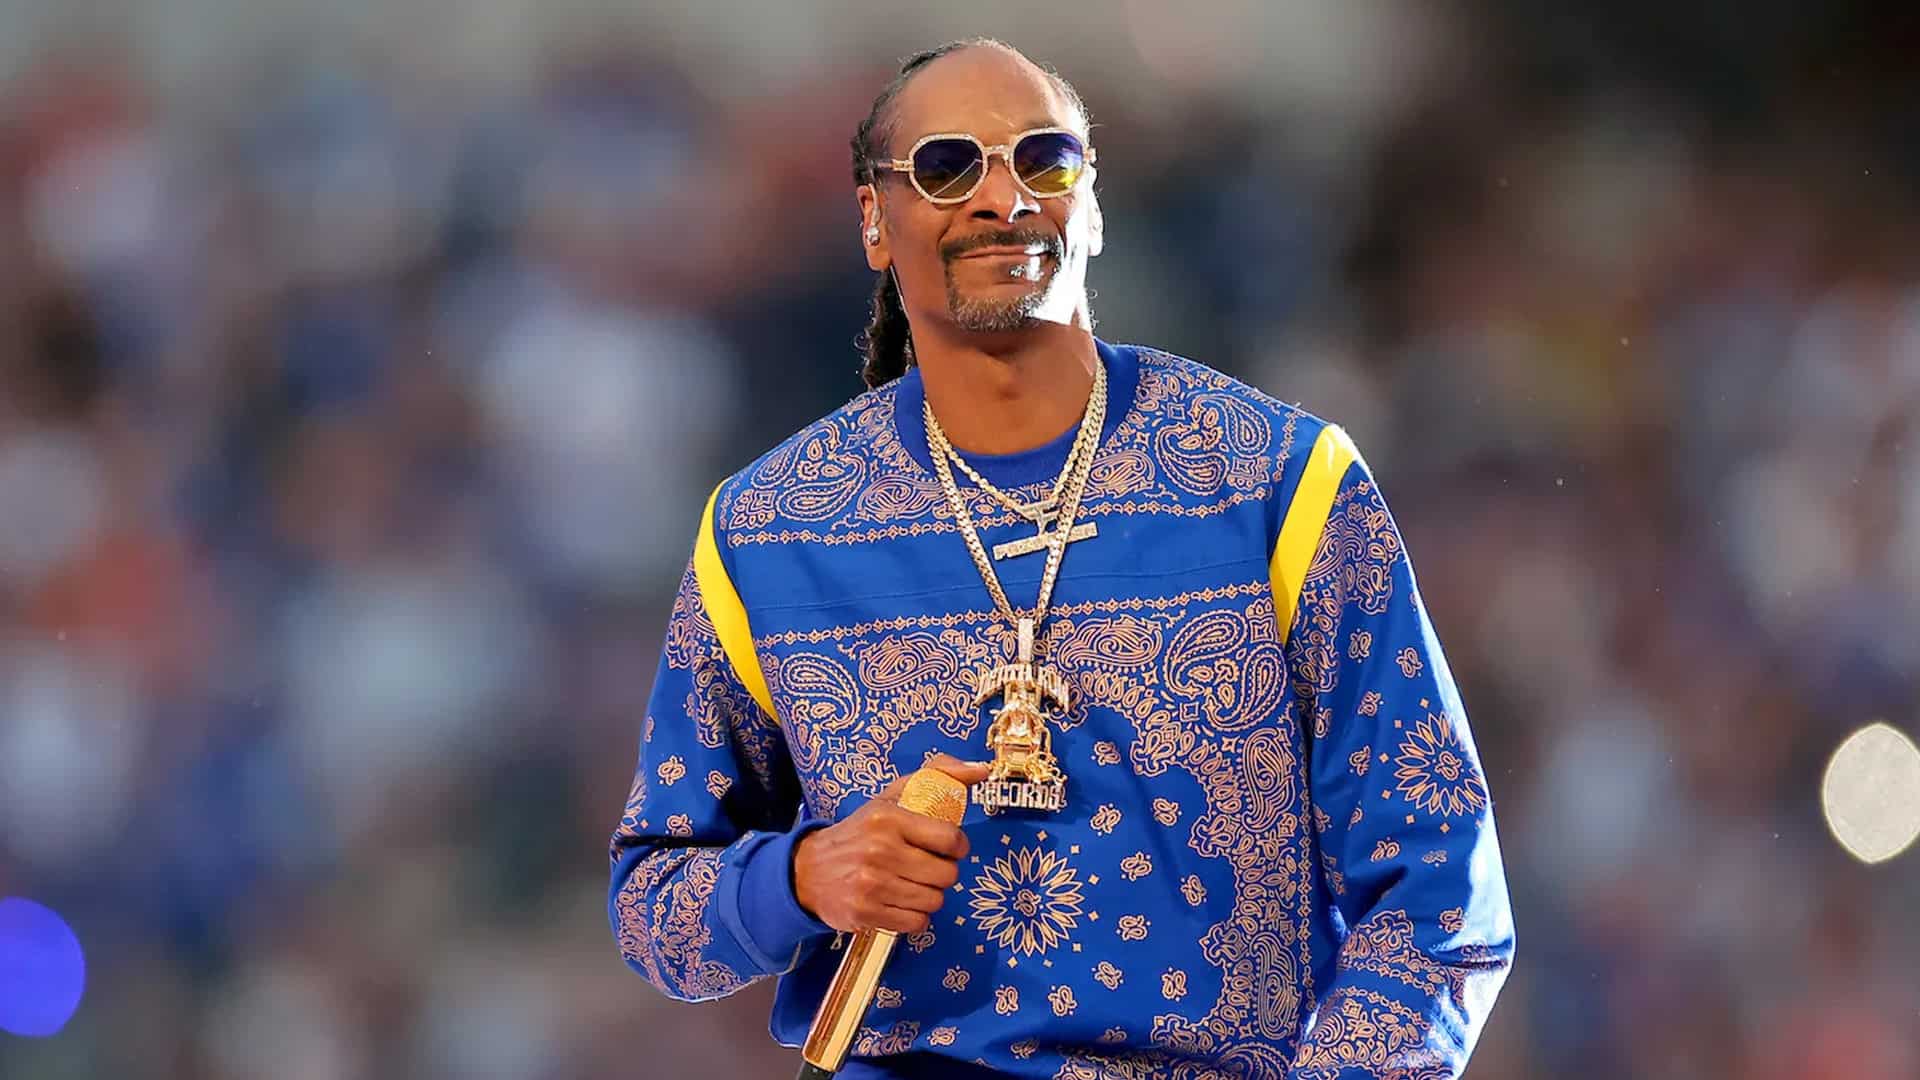 Snoop Dogg, February 2022 (Kevin C. Cox/Getty Images)